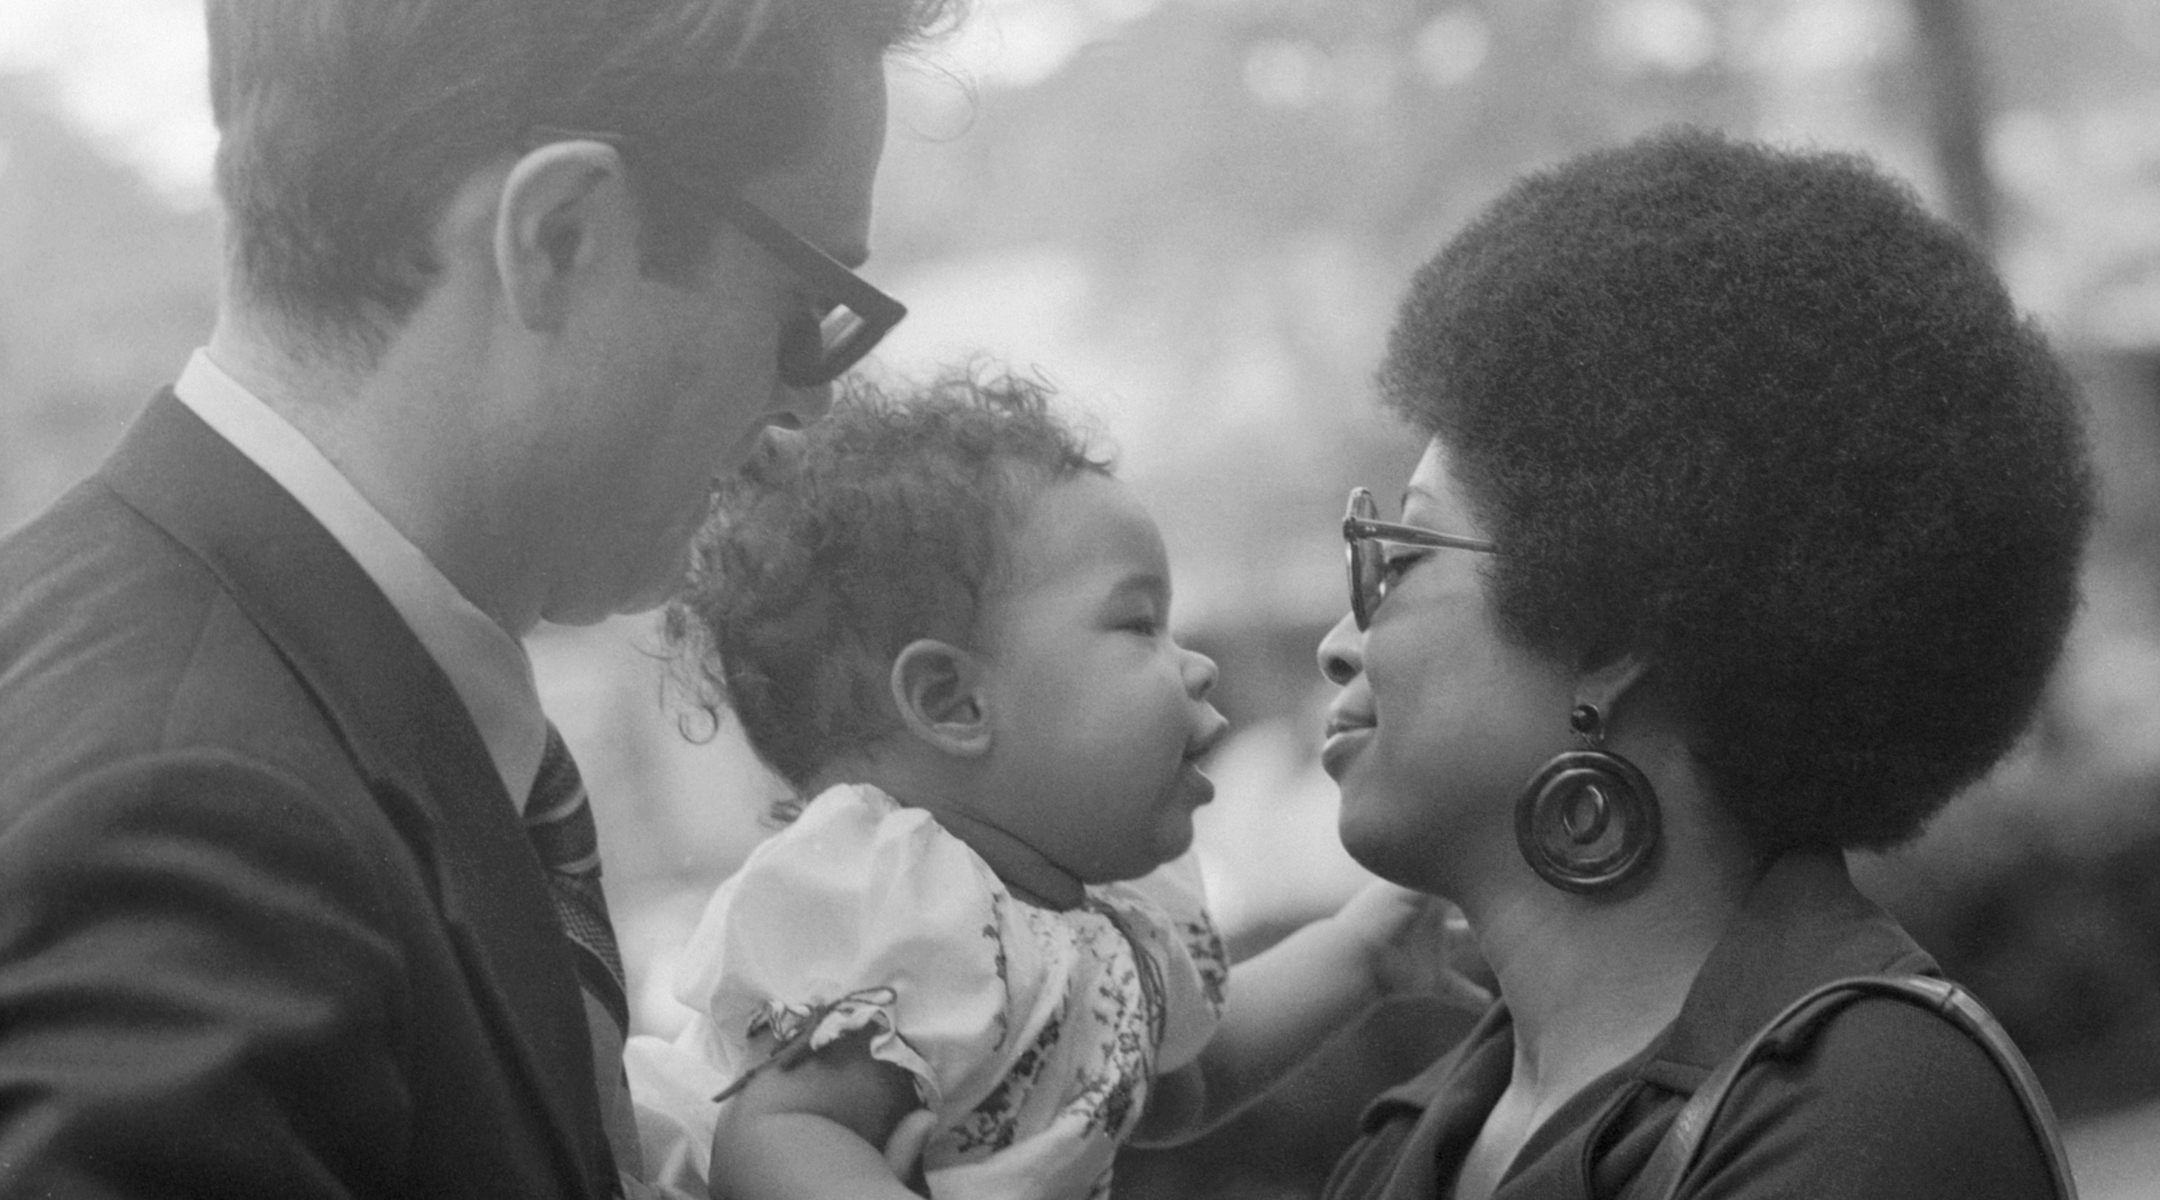 An interracial couple with their infant daughter in a black-and-white photograph from 1970